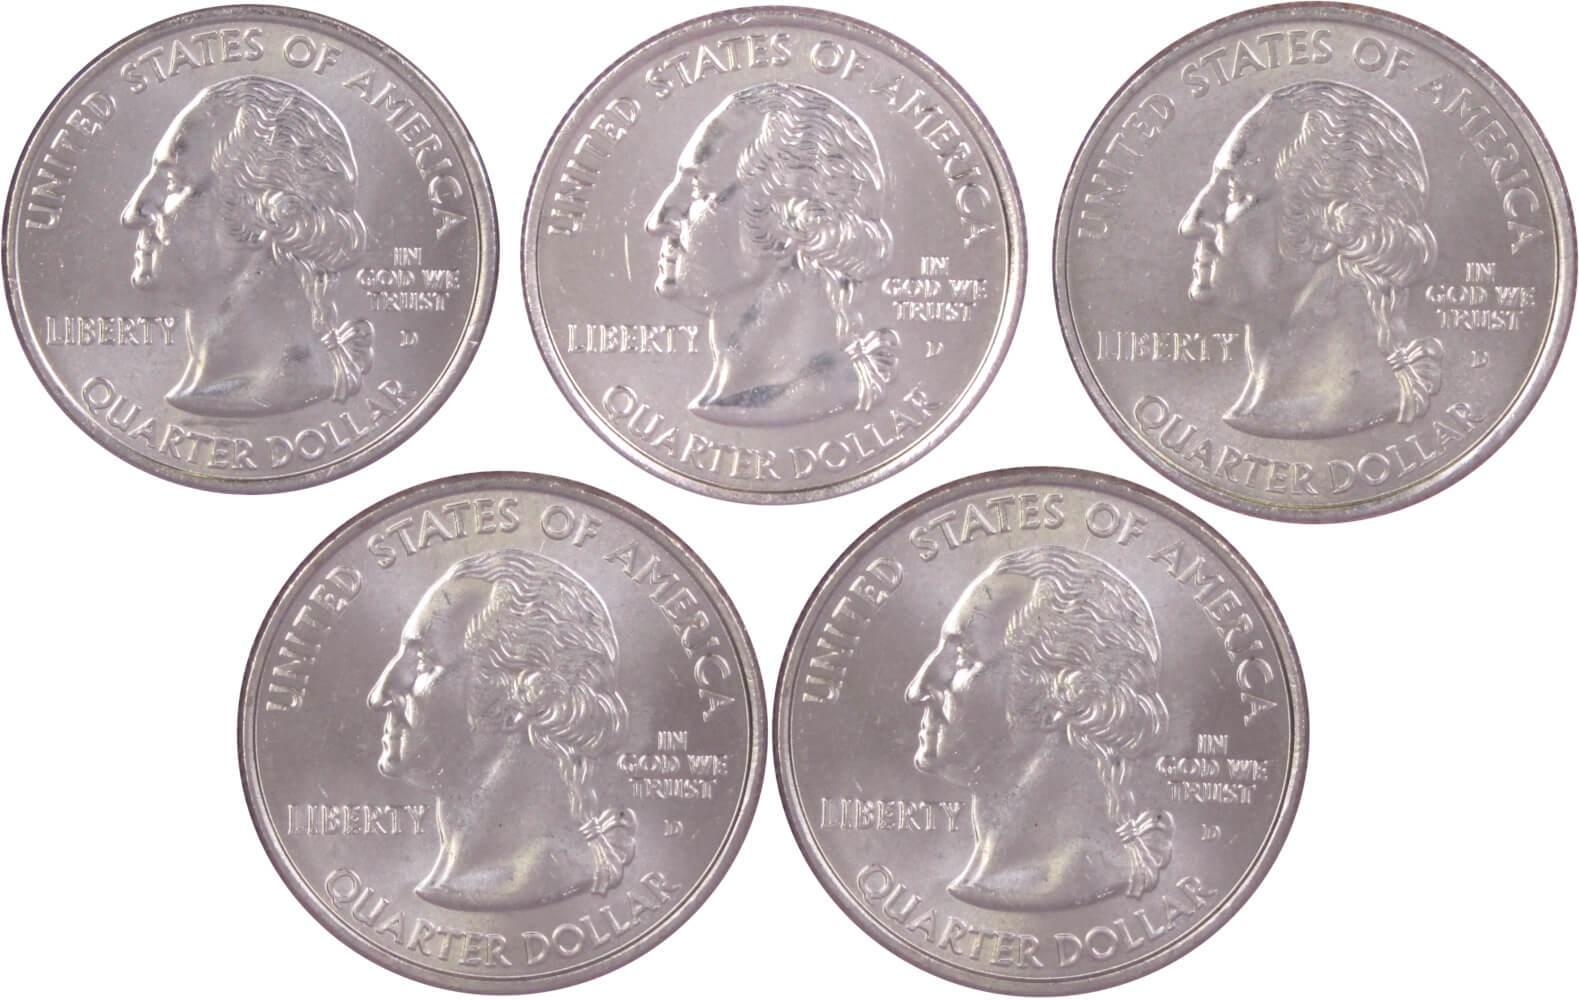 2008 D State Quarter 5 Coin Set BU Uncirculated Mint State 25c Collectible